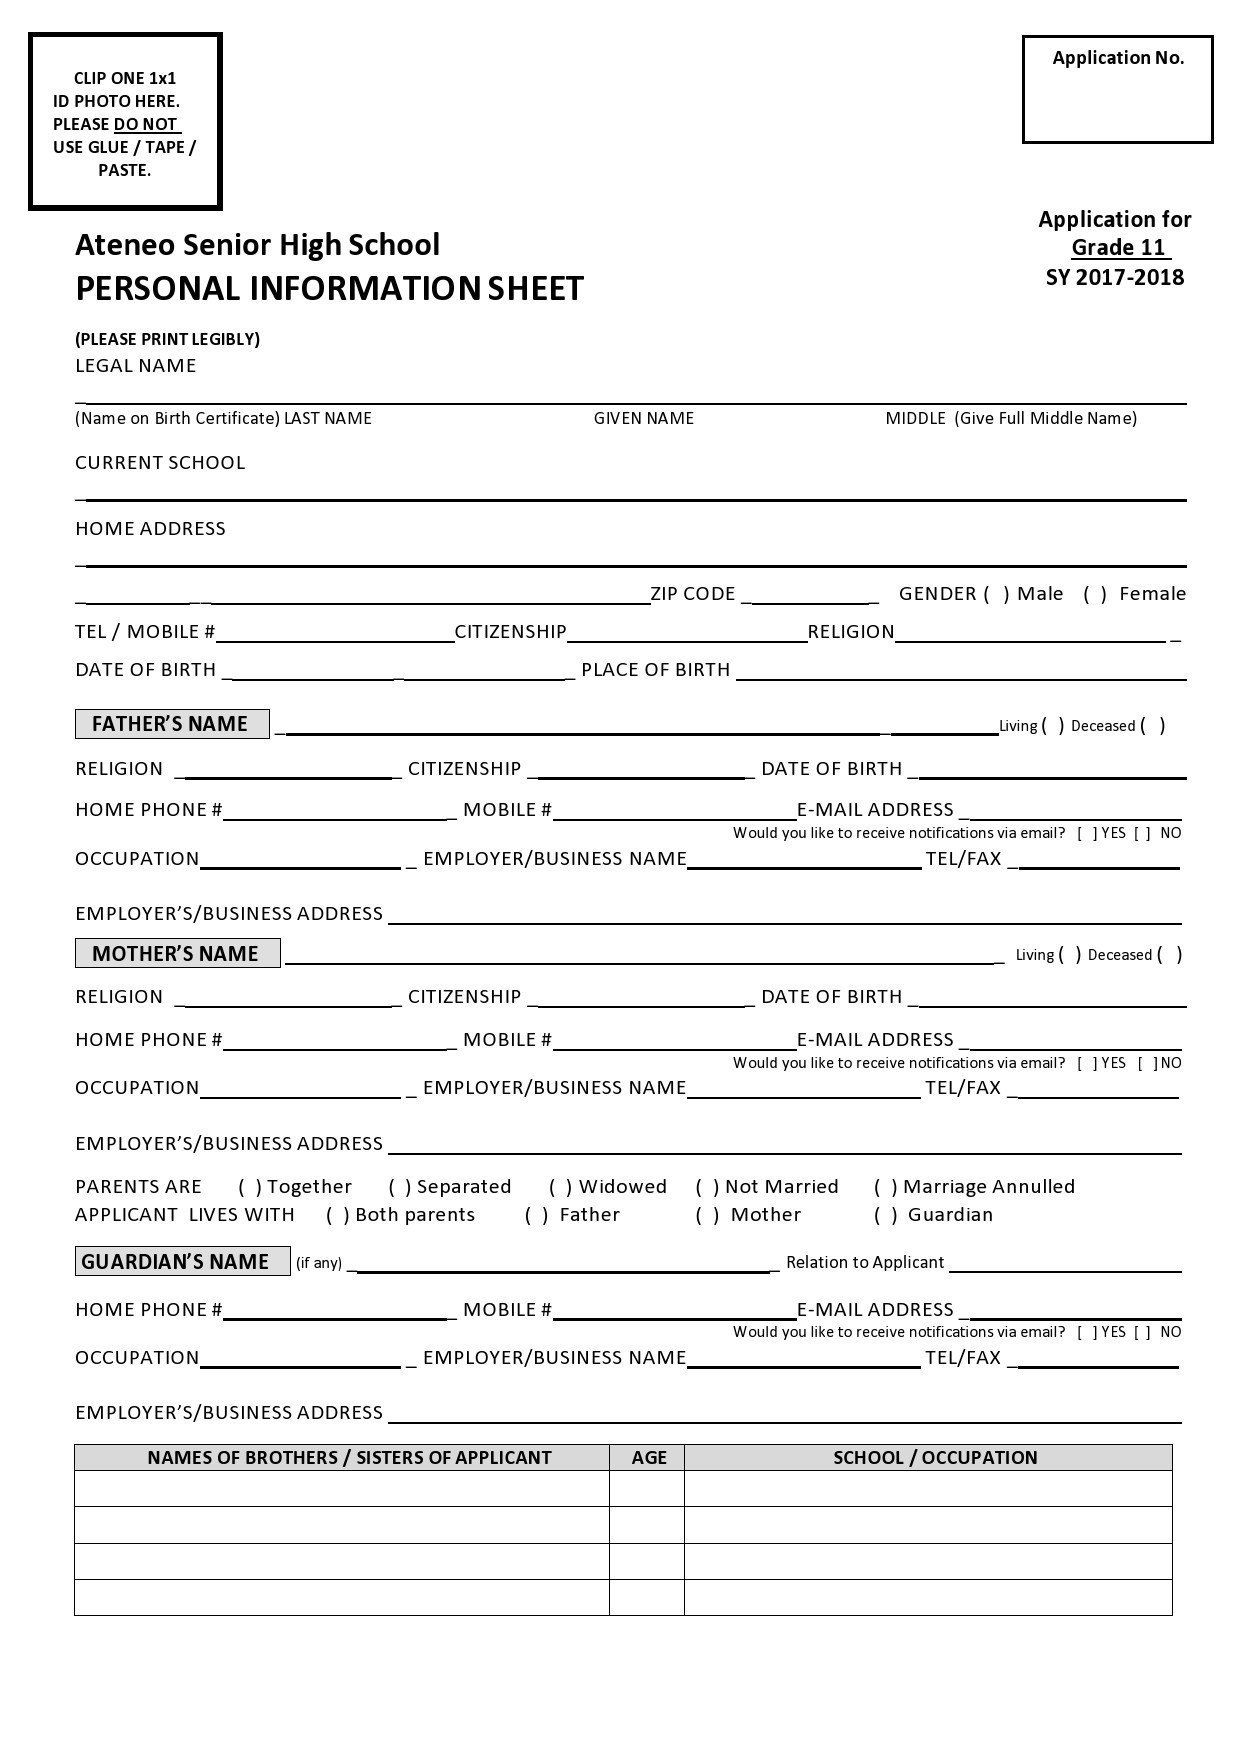 Free personal information form 38